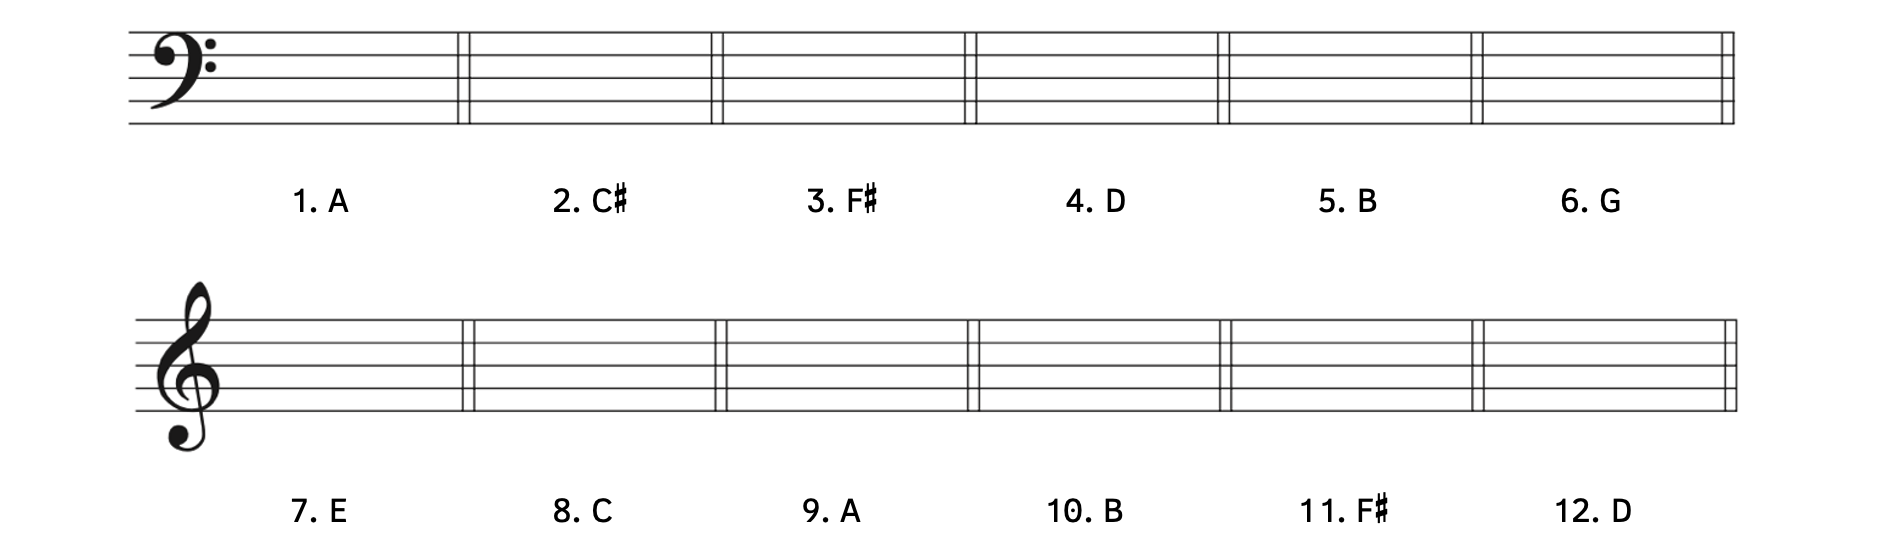 Exercise to write the given major key signatures. Numbers 1-6 are in the bass clef. Number 1, A major. Number 2, C-sharp major. Number 3, F-sharp major. Number 4, D major. Number 5, B major. Number 6, G major. Numbers 7-12 are in treble clef. Number 7 is E major. Number 8 is C major. Number 9 is A major. Number 10 is B major. Number 11 is F-sharp major. Number 12 is D major.